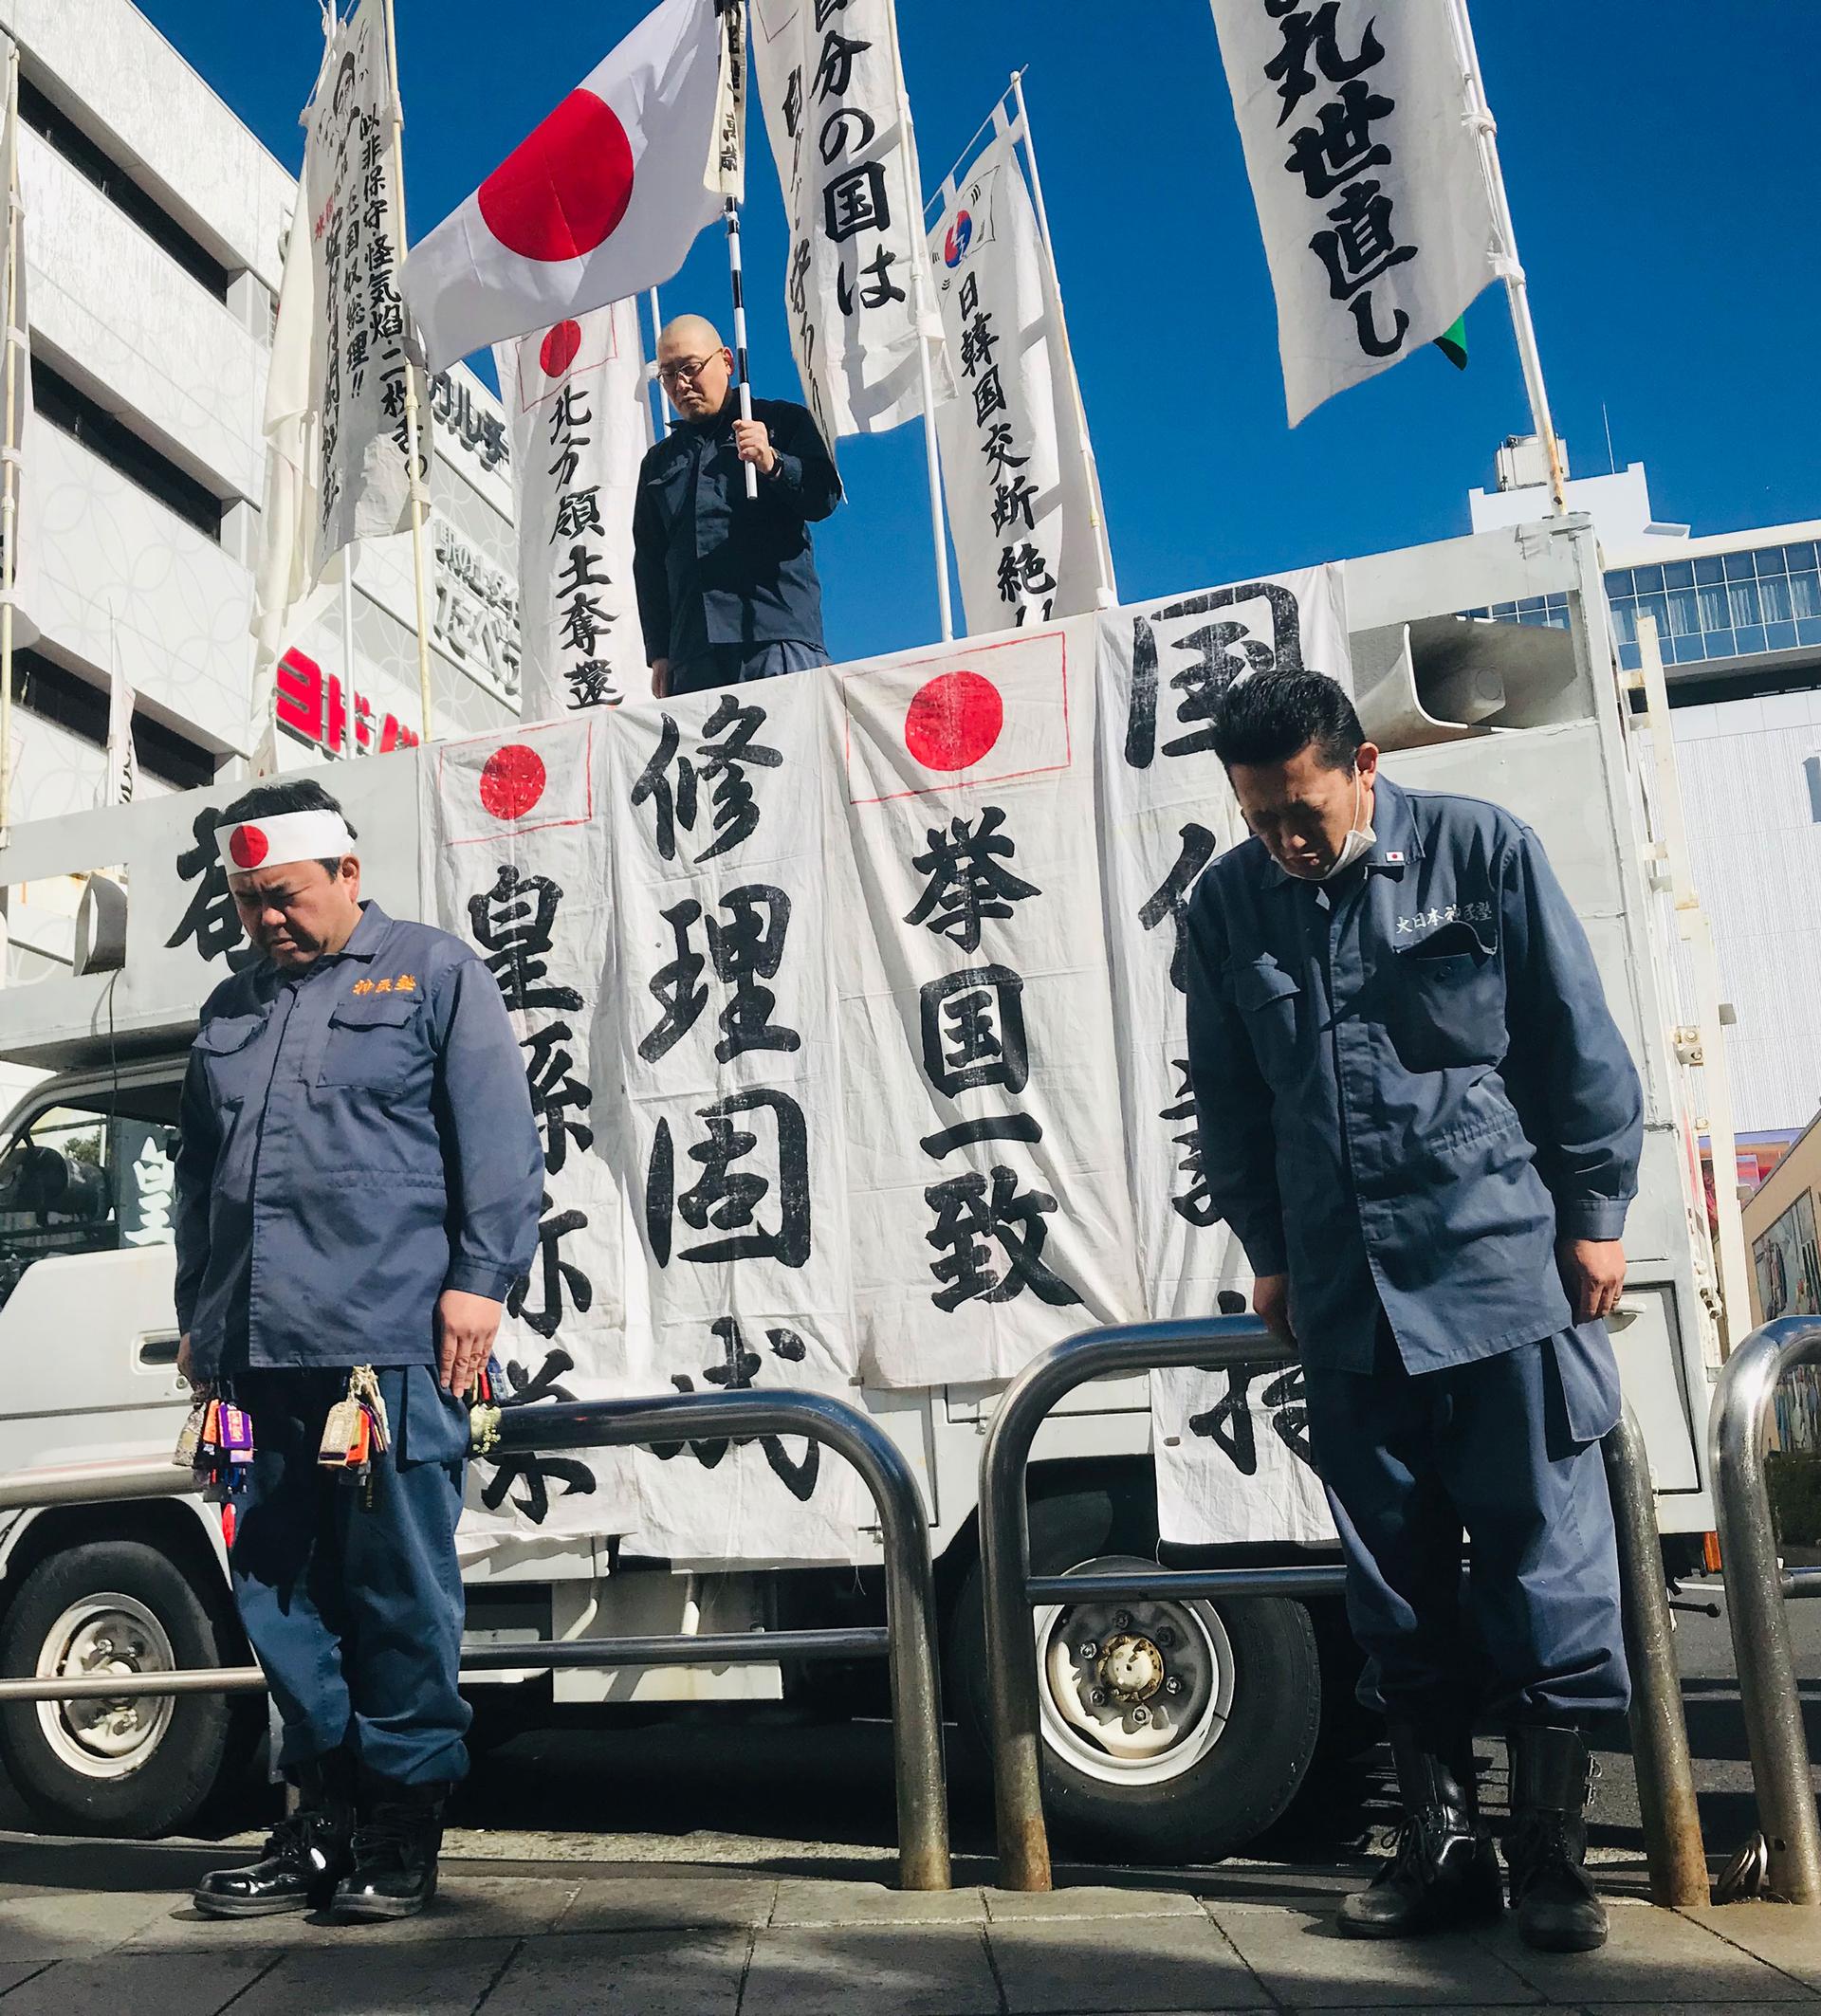 Men in blue jumpsuits stand at attention in front of a white van covered in banners written in Japanese and Japanese flags.